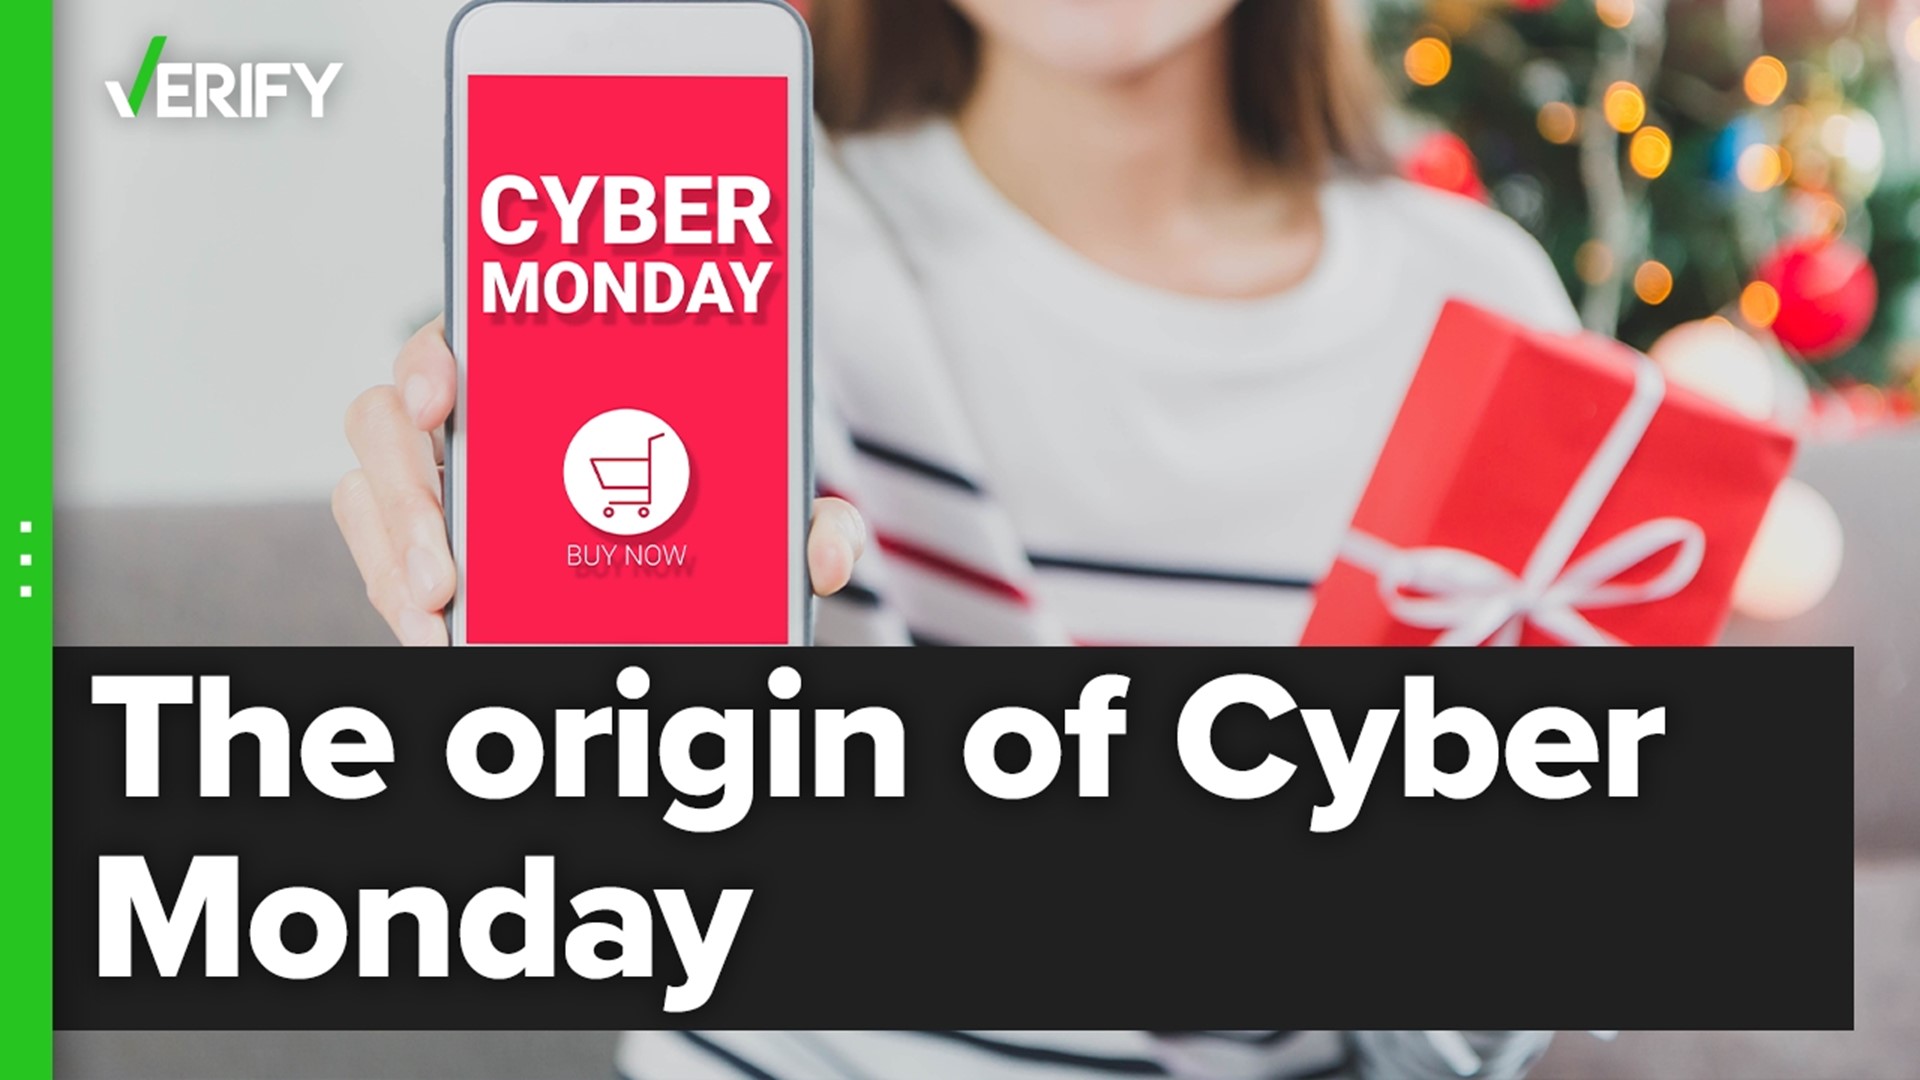 Cyber Monday did get its start because people shopped online while at work. Retailers saw the day as an opportunity to entice more people to shop online.